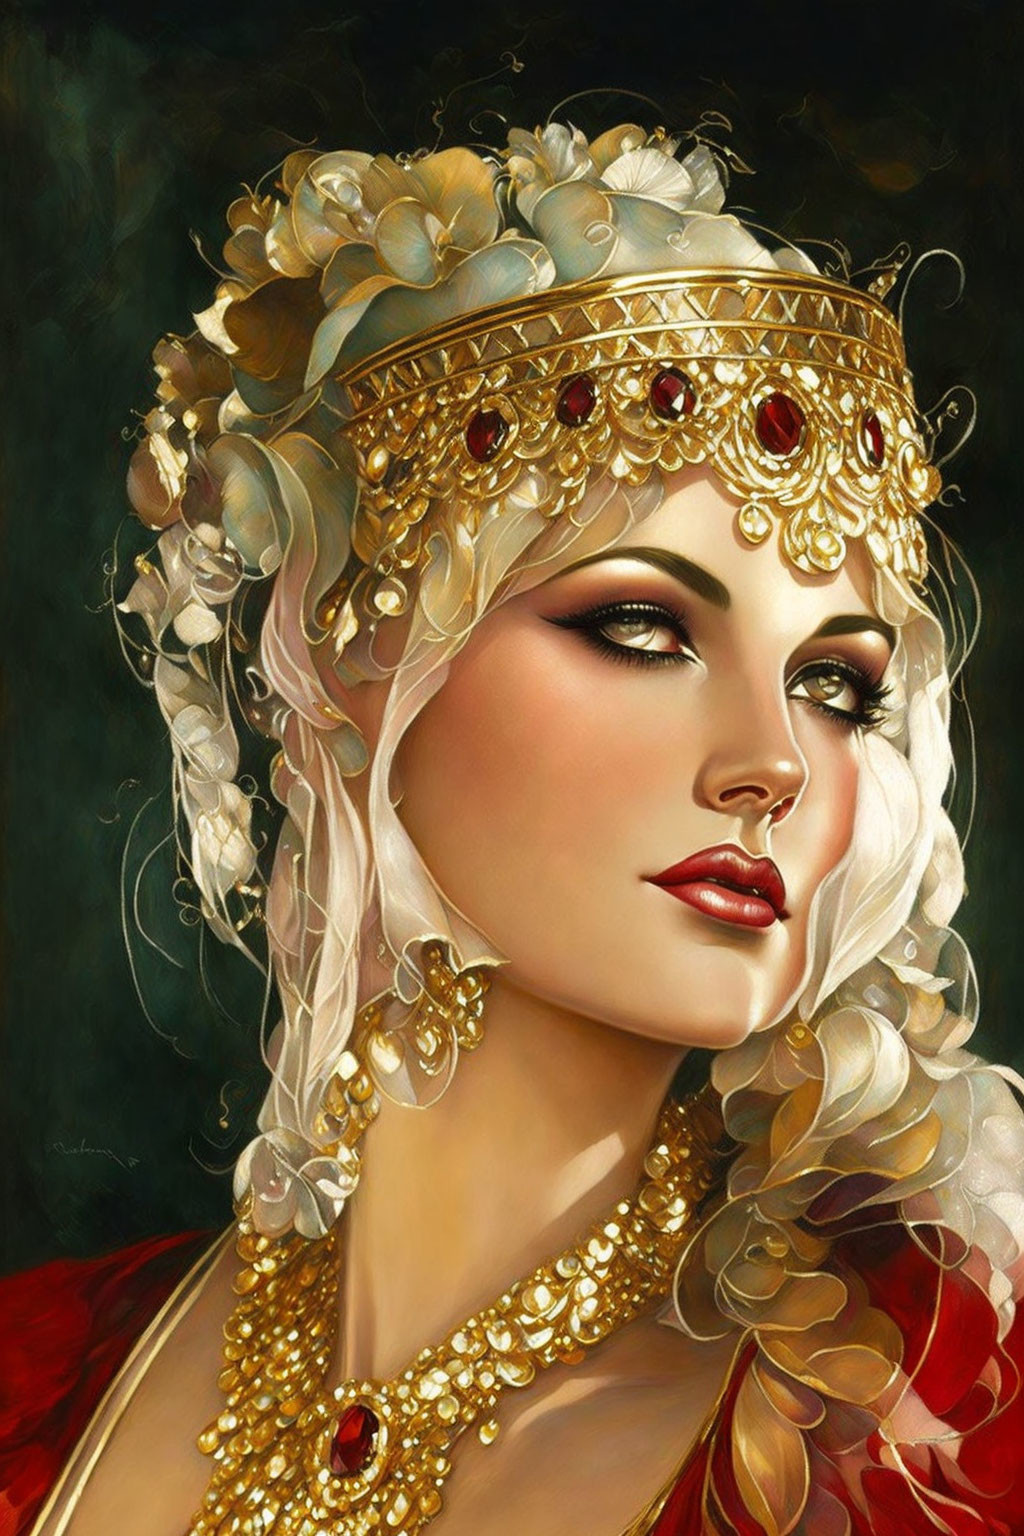 Illustrated woman adorned with golden jewelry on dark background